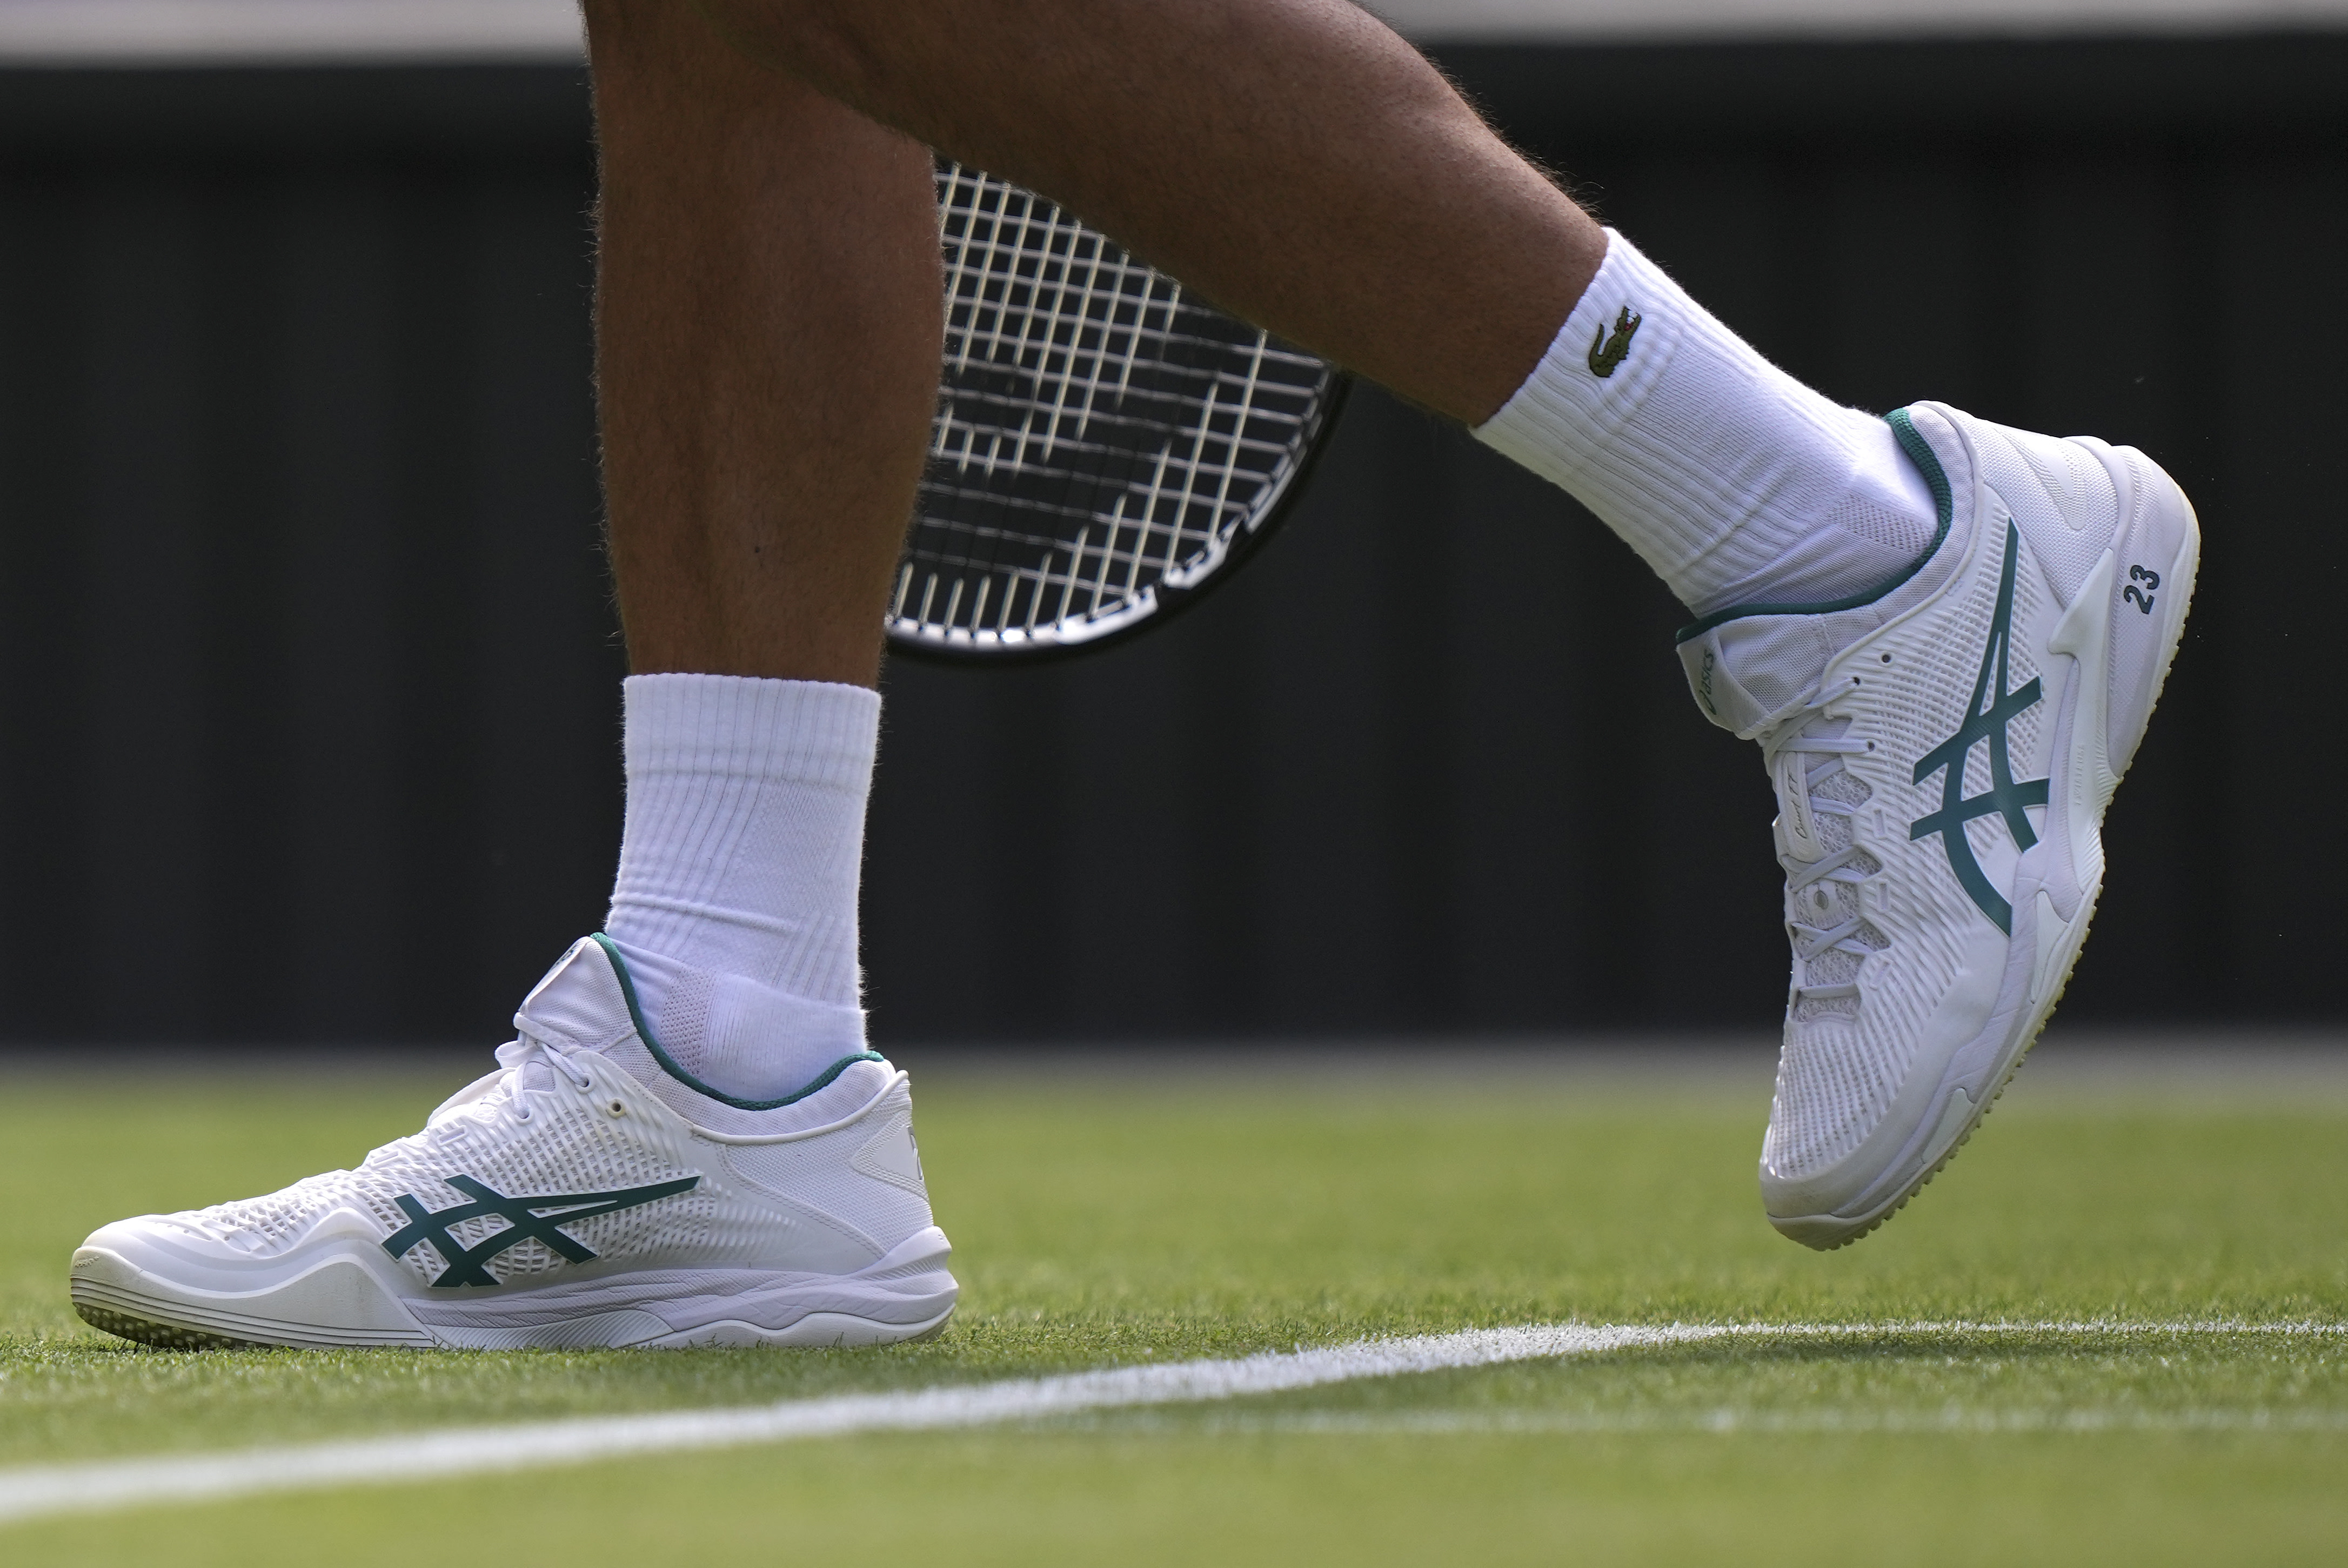 Novak Djokovic plays at Wimbledon with the number 23 printed on his white tennis shoes